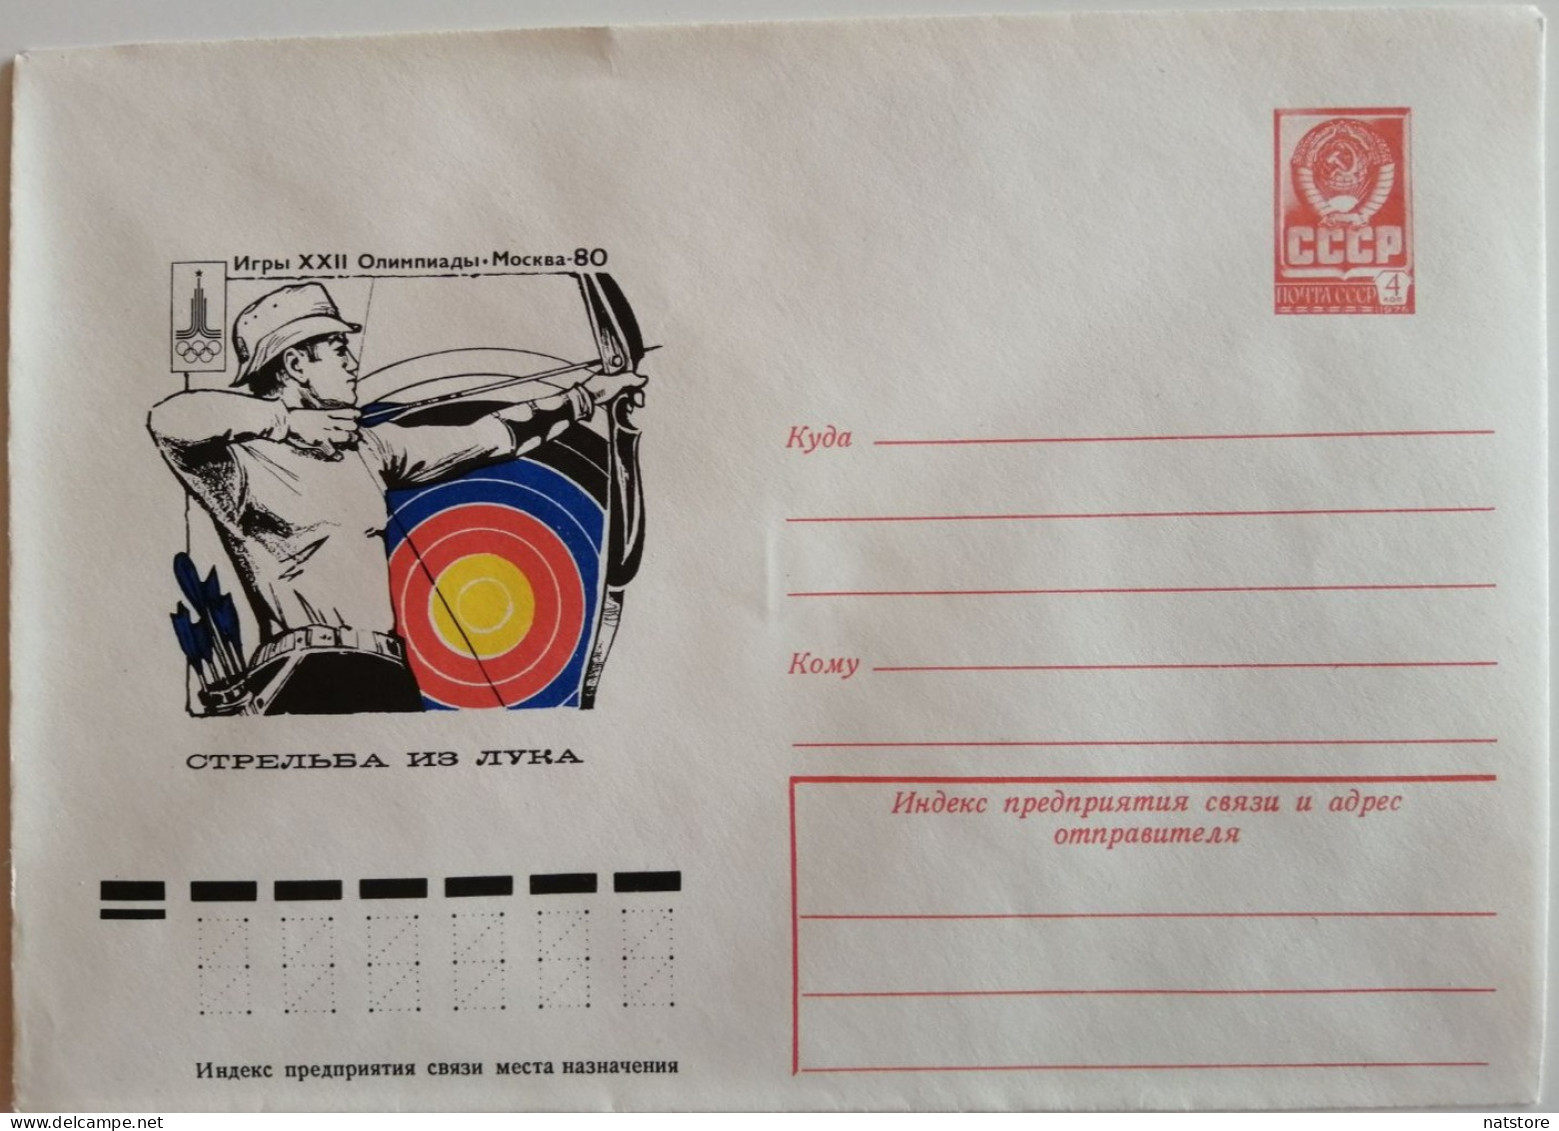 1977..USSR...VINTAGE  COVER WITH STAMP.. ..OLYMPIC GAMES XXII..MOSCOW-80..ARCHERY - Sommer 1980: Moskau